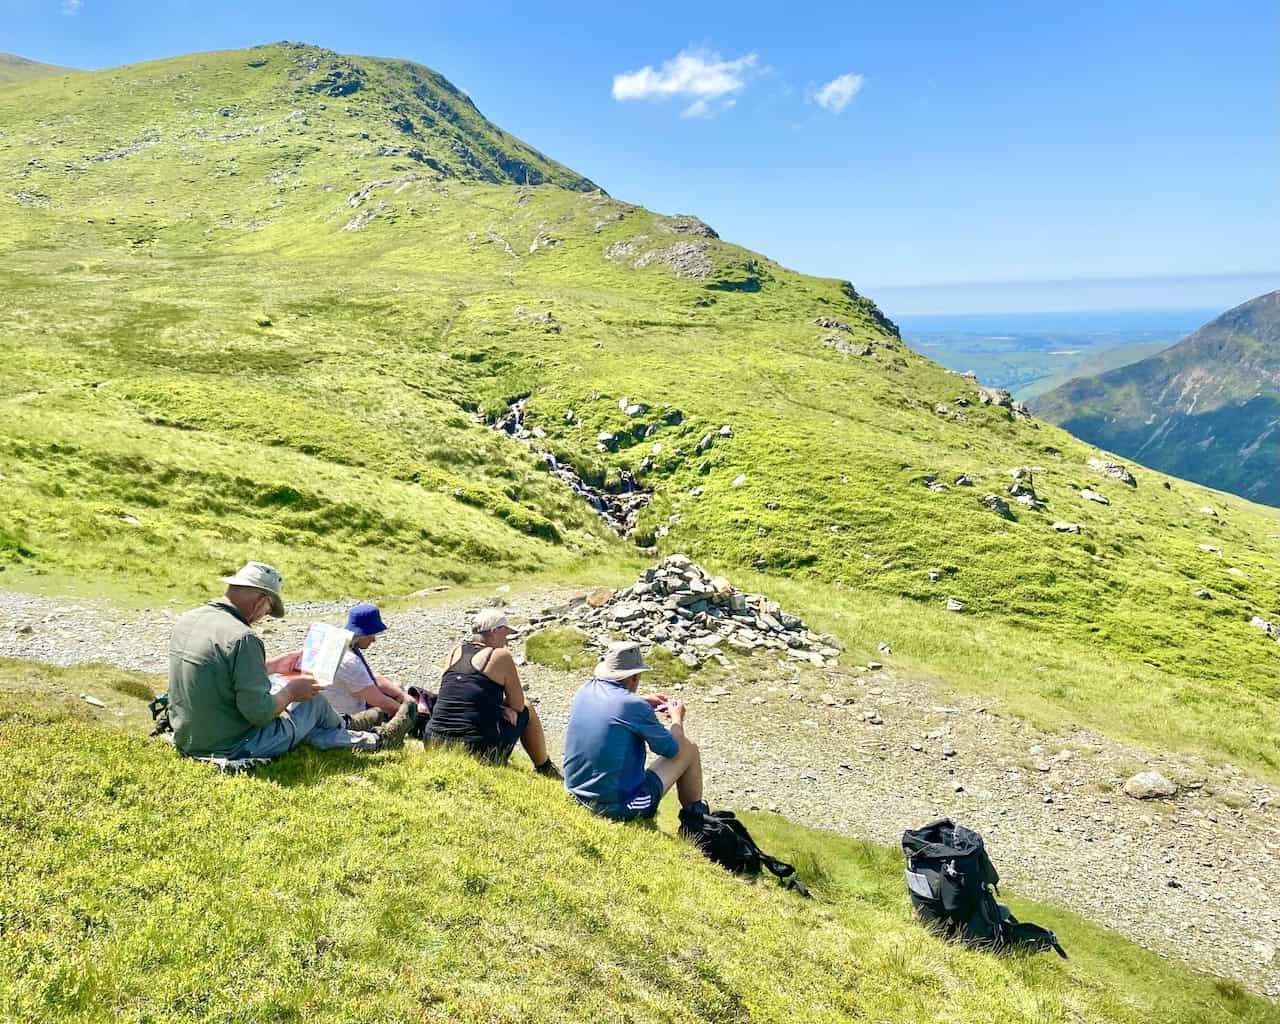 Time for a break at Coledale Hause. Coledale Hause is just over one-third of the way round our Grasmoor walk.